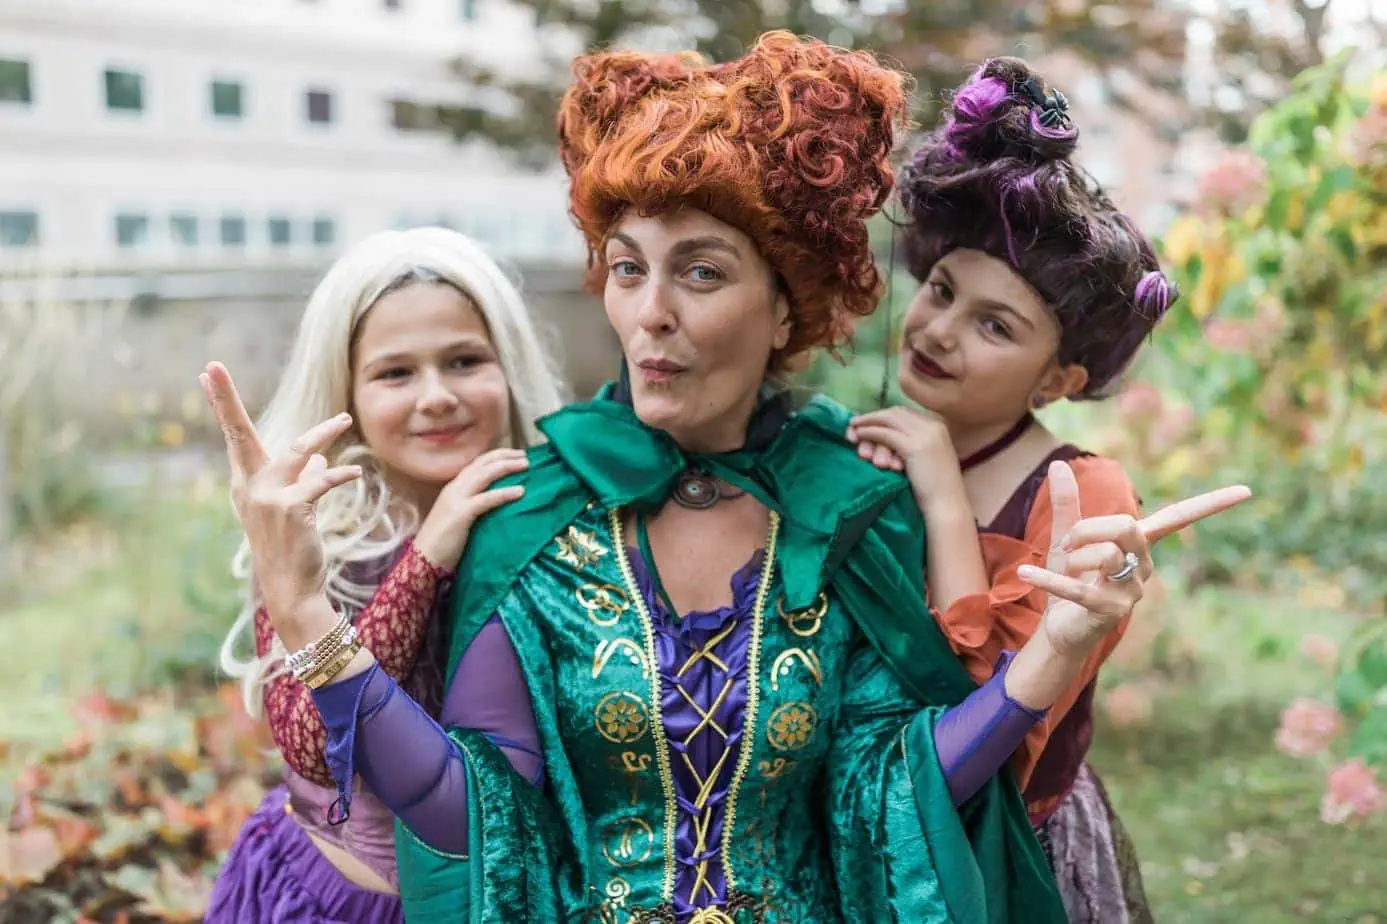 Mother and daughters Halloween costumes of Hocus Pocus characters